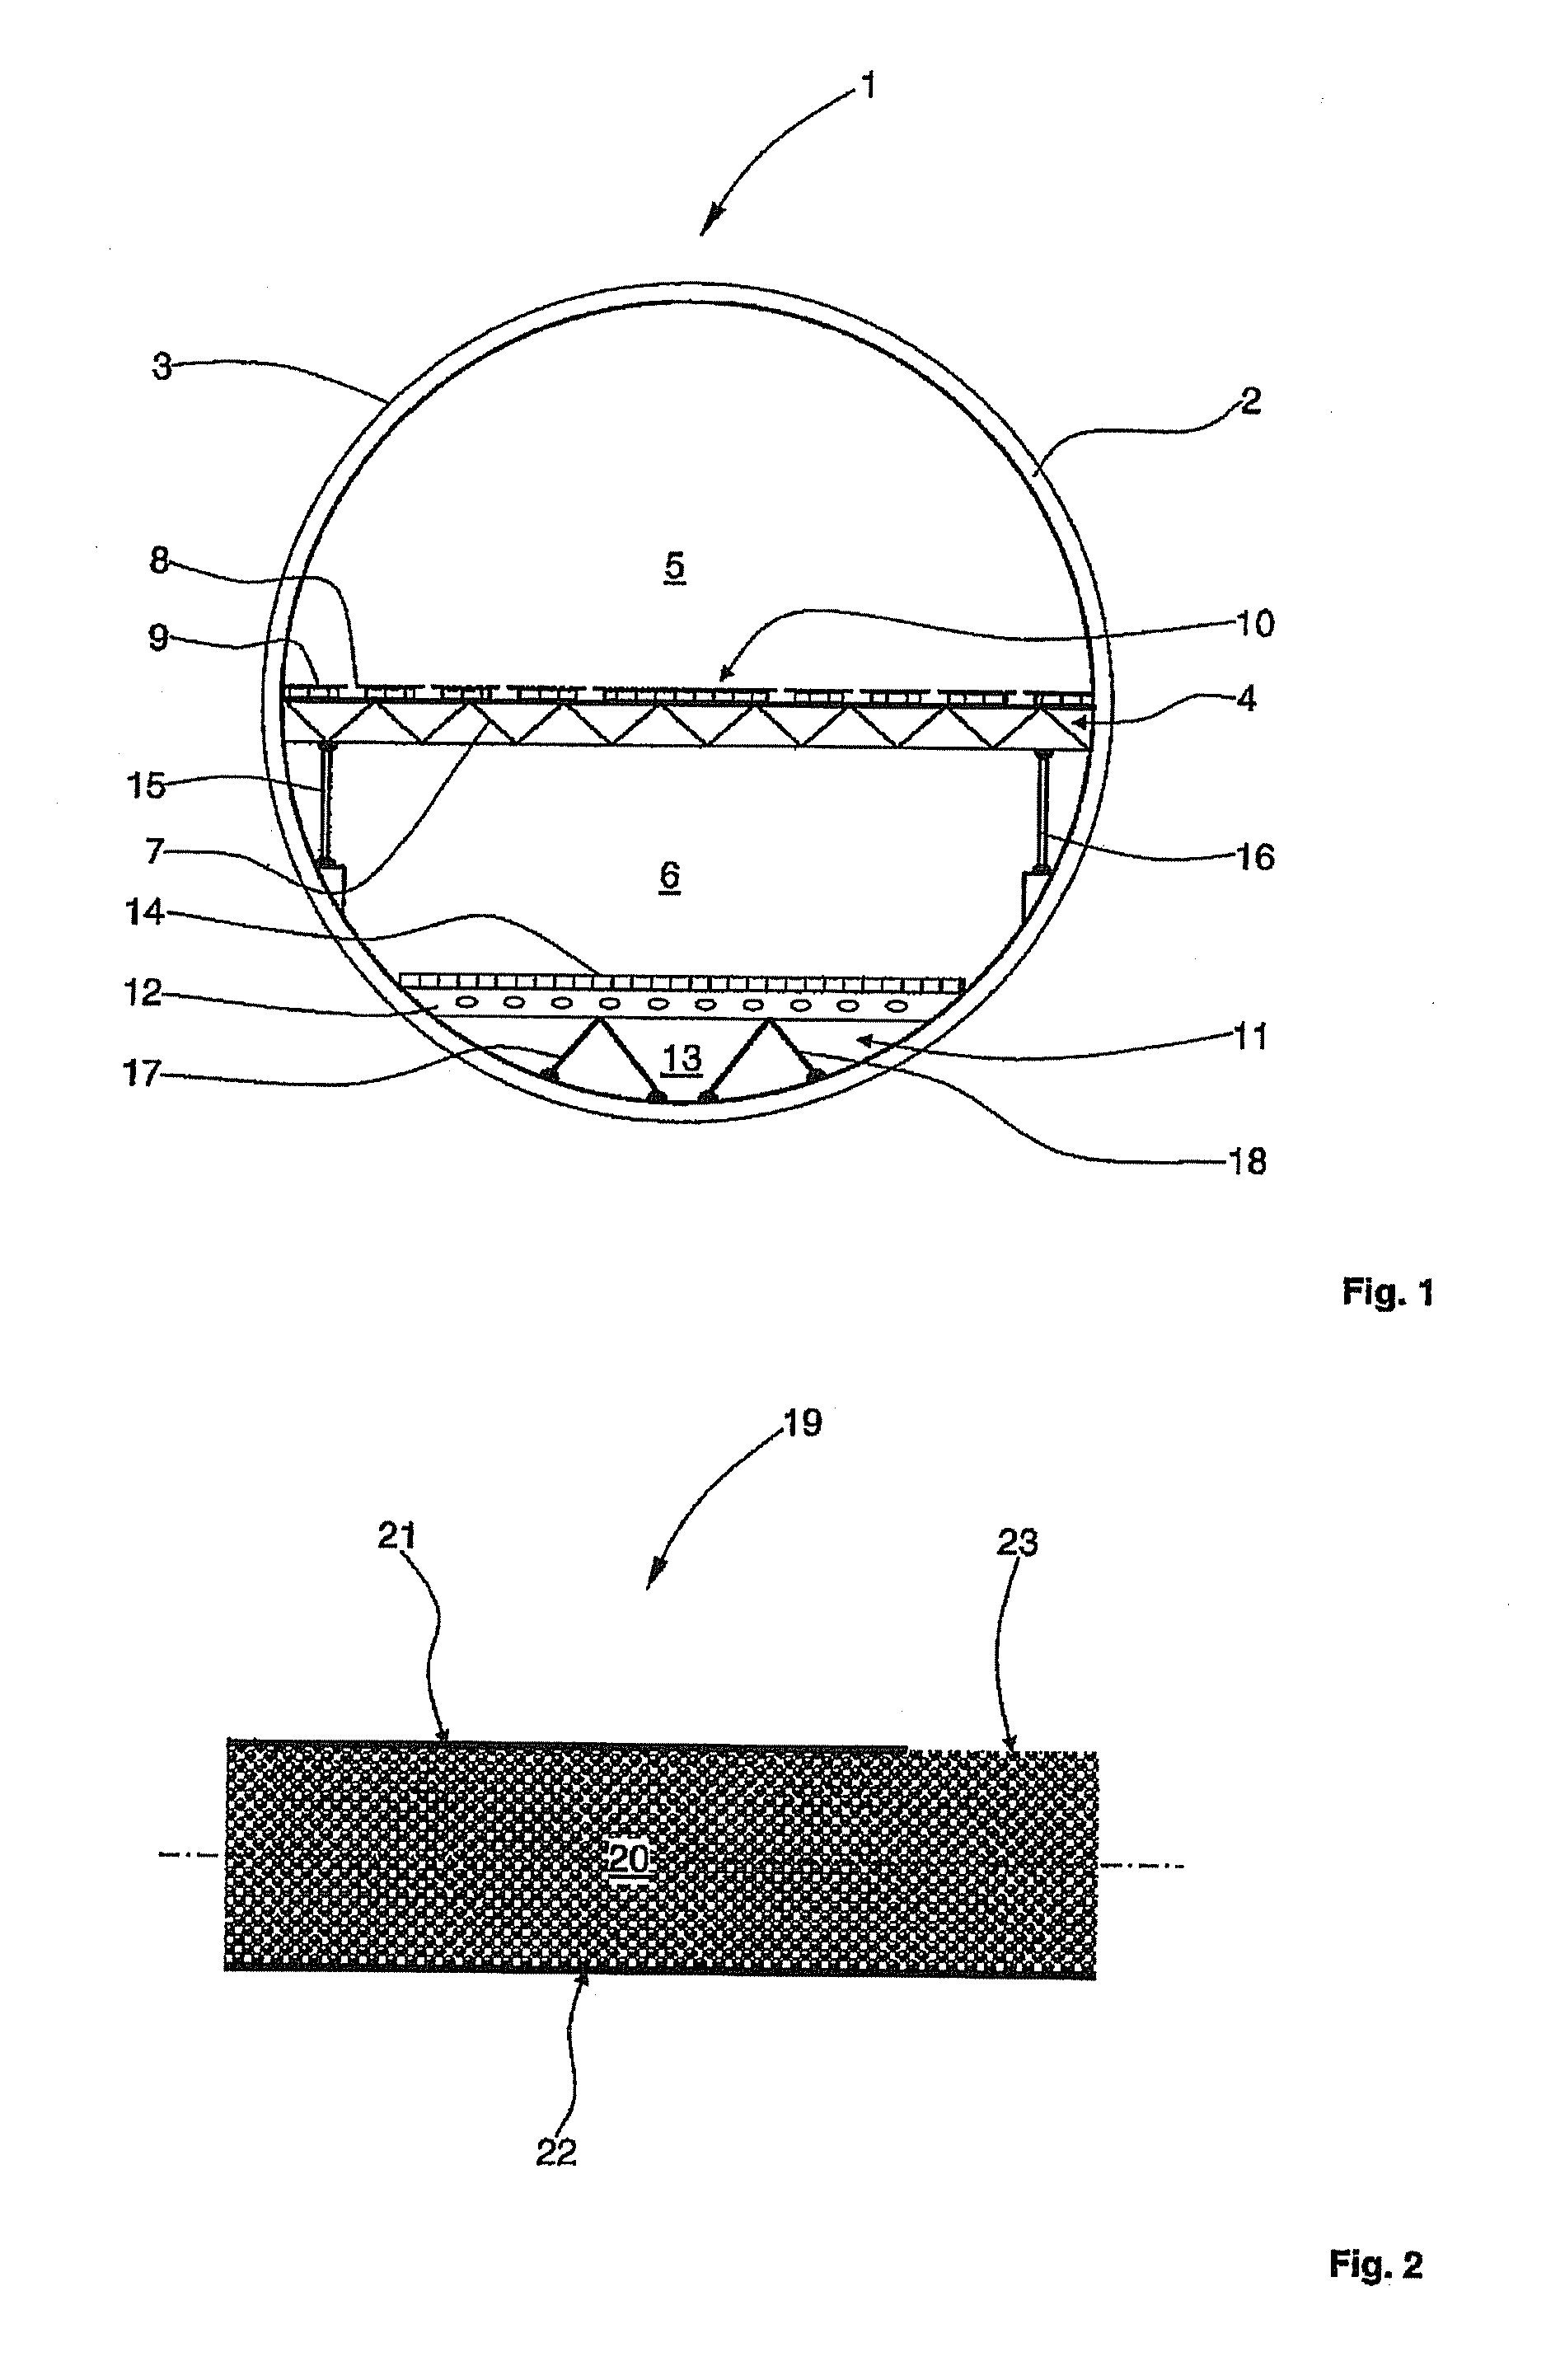 Rod for supporting components in a fuselage cell structure of an aircraft